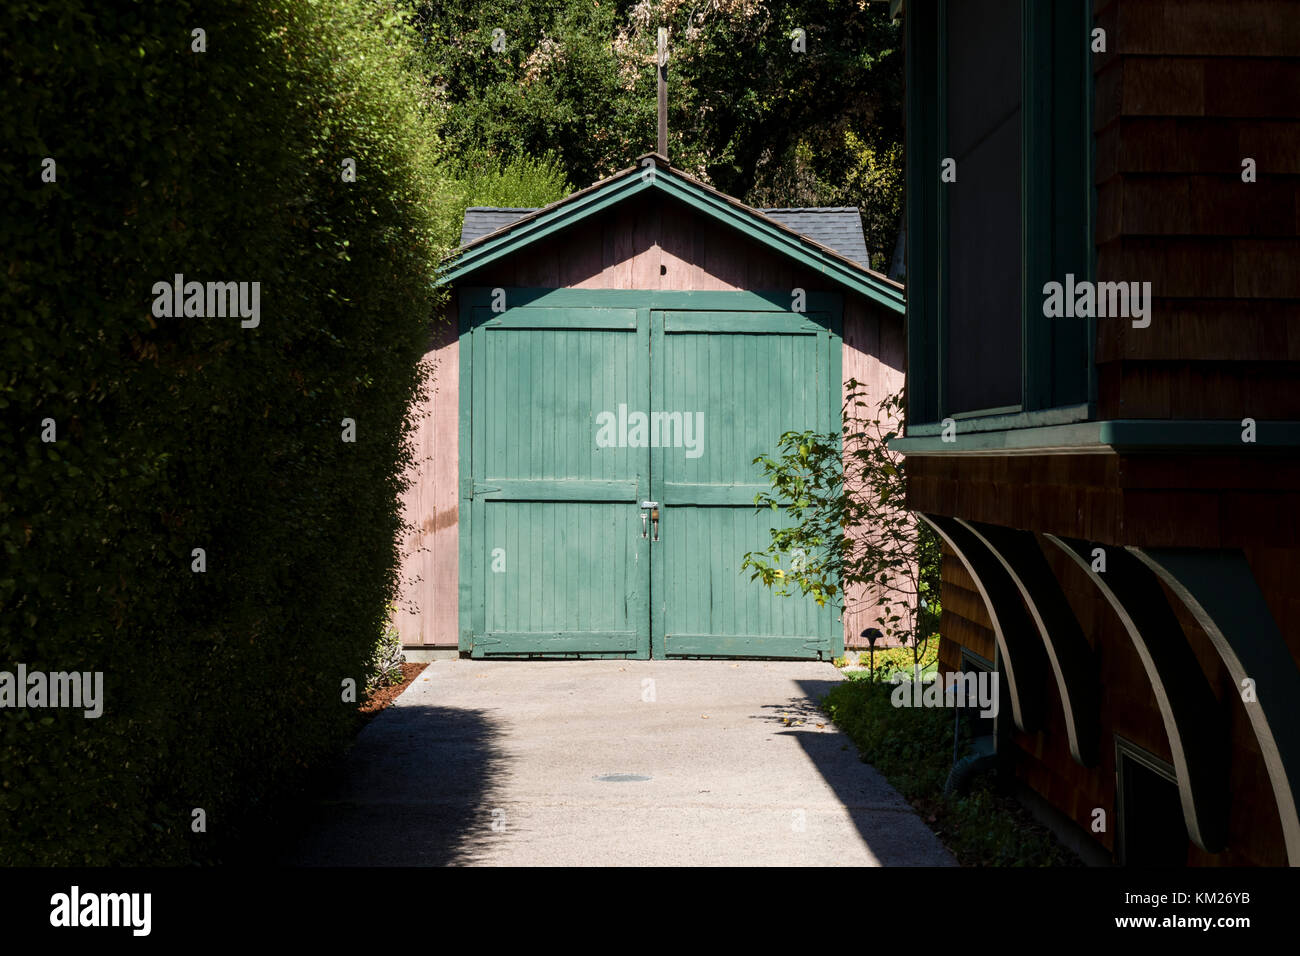 Historic garage where Silicon Valley started, future home of Hewlett Packard company Stock Photo